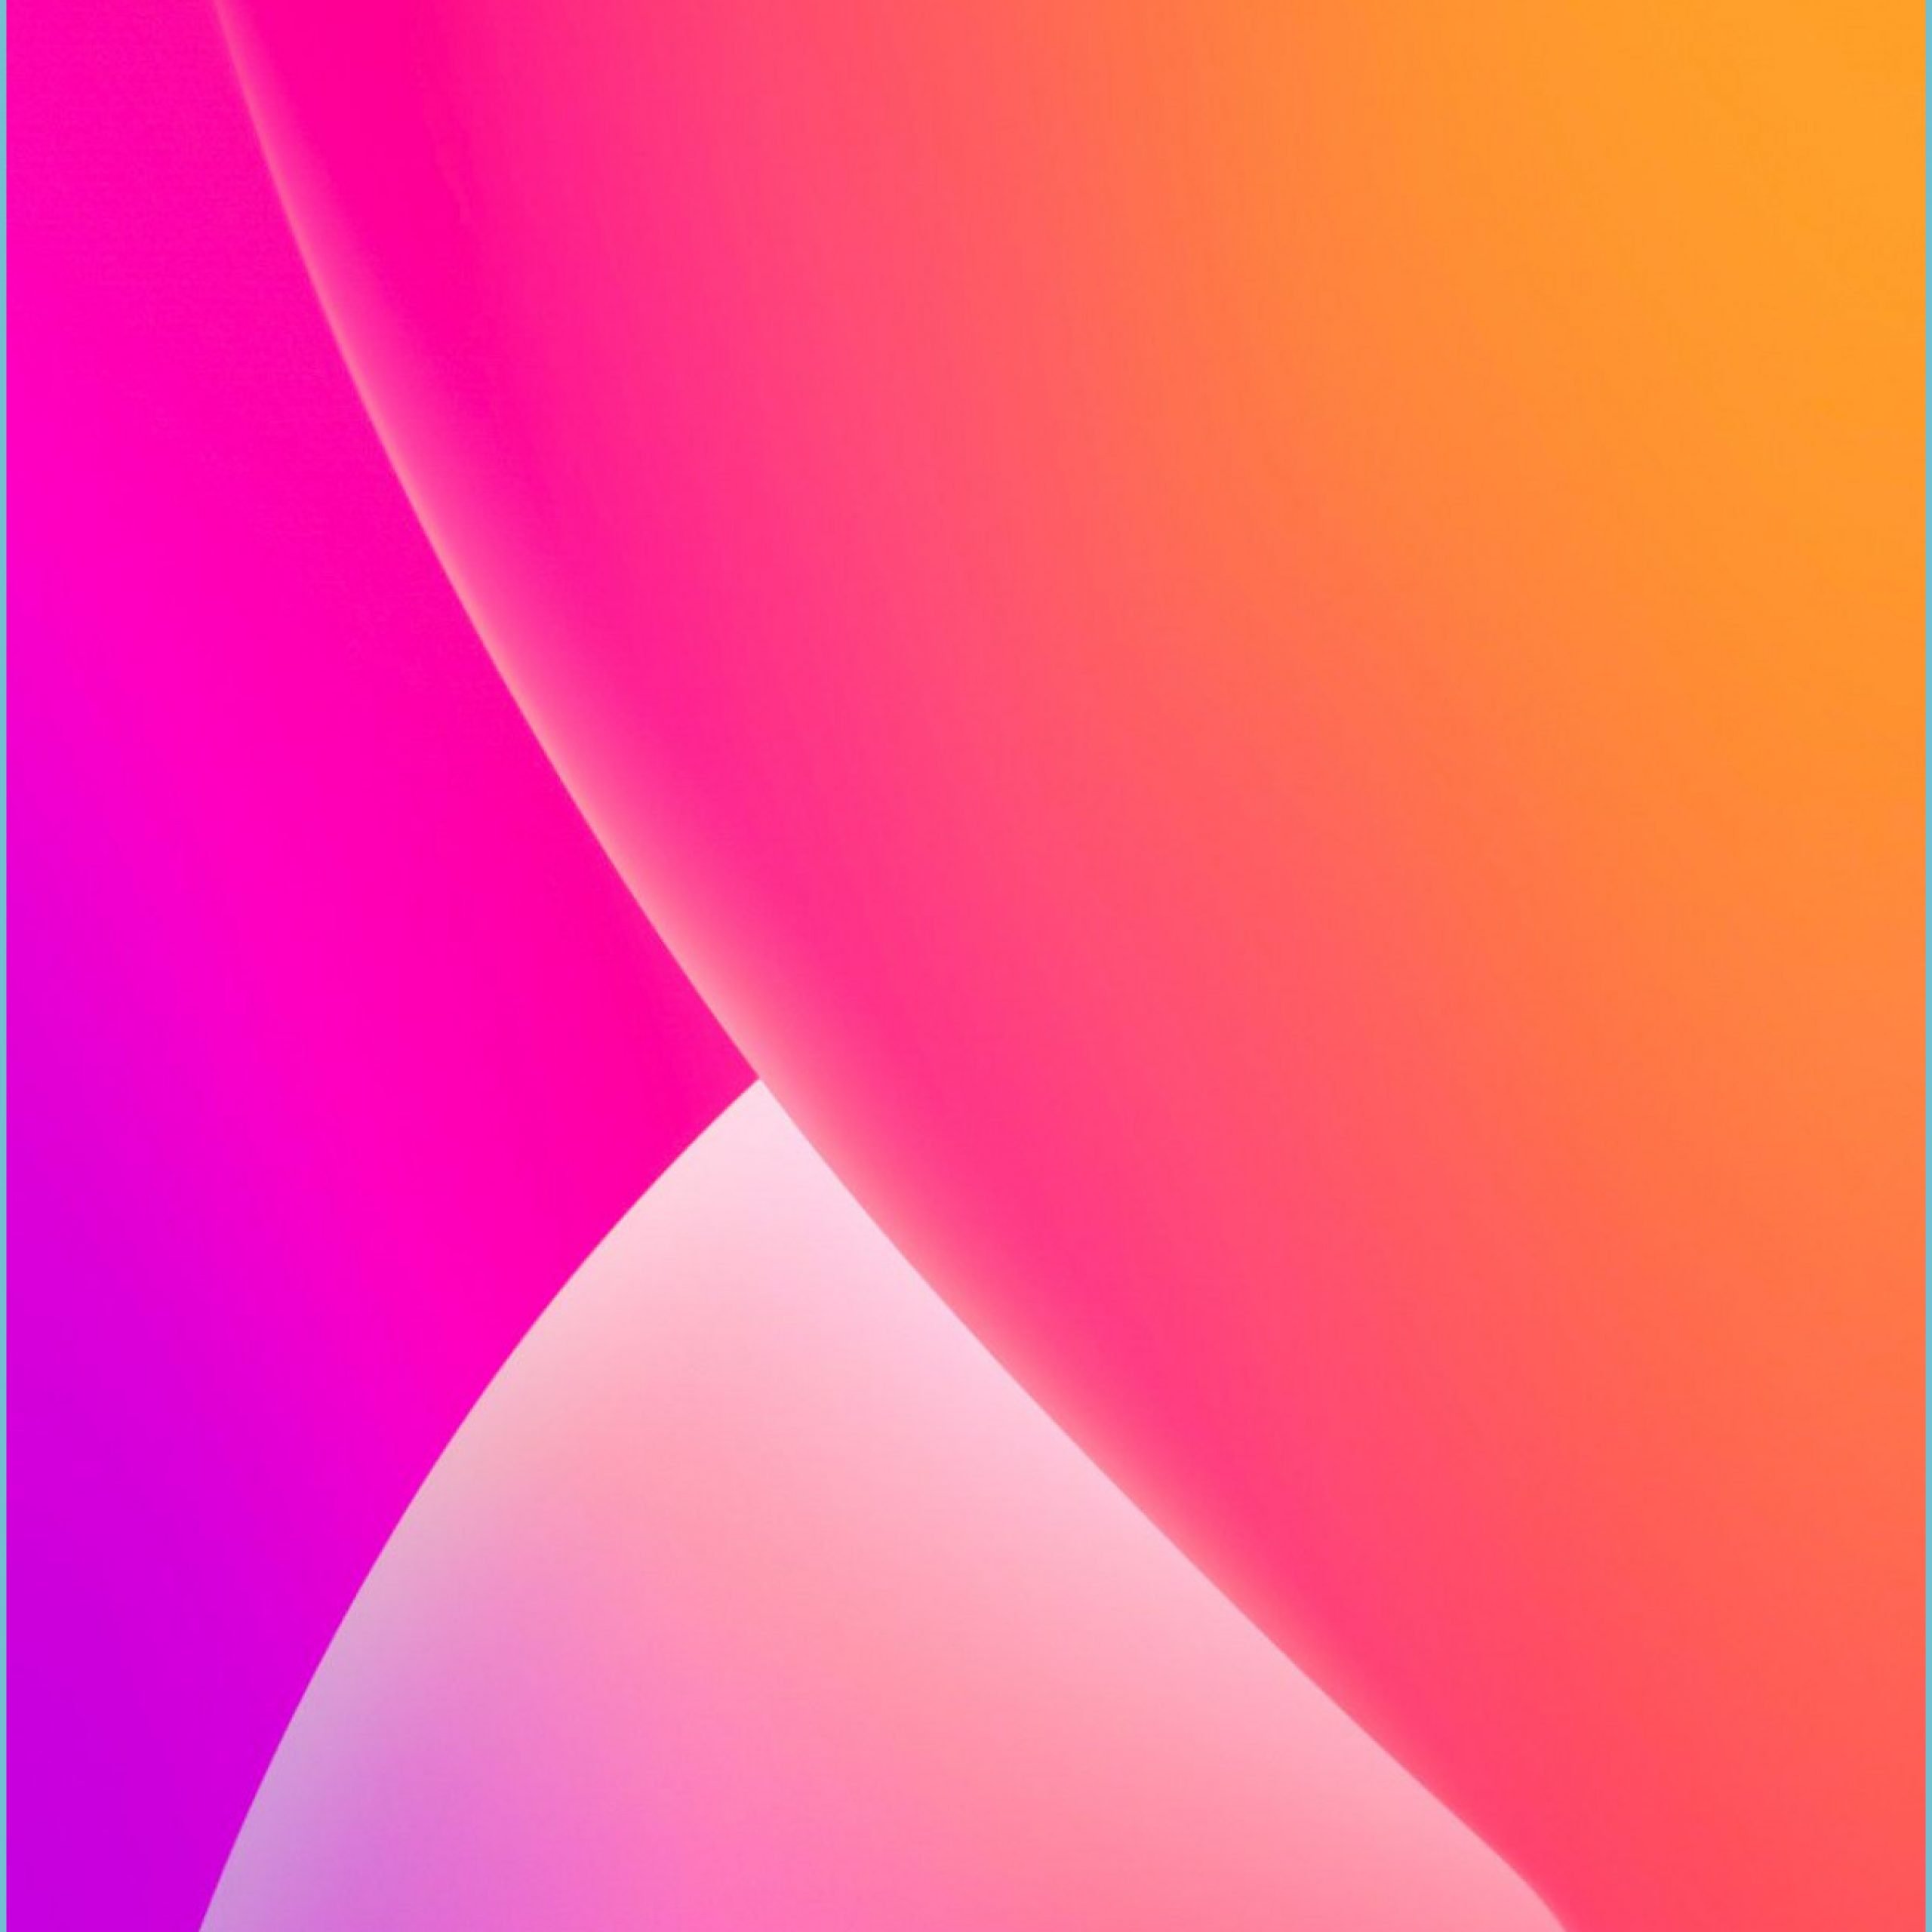 IOS 12 Wallpaper In 12 Colourful Wallpaper iPhone, iPhone Wallpaper For Ios 14